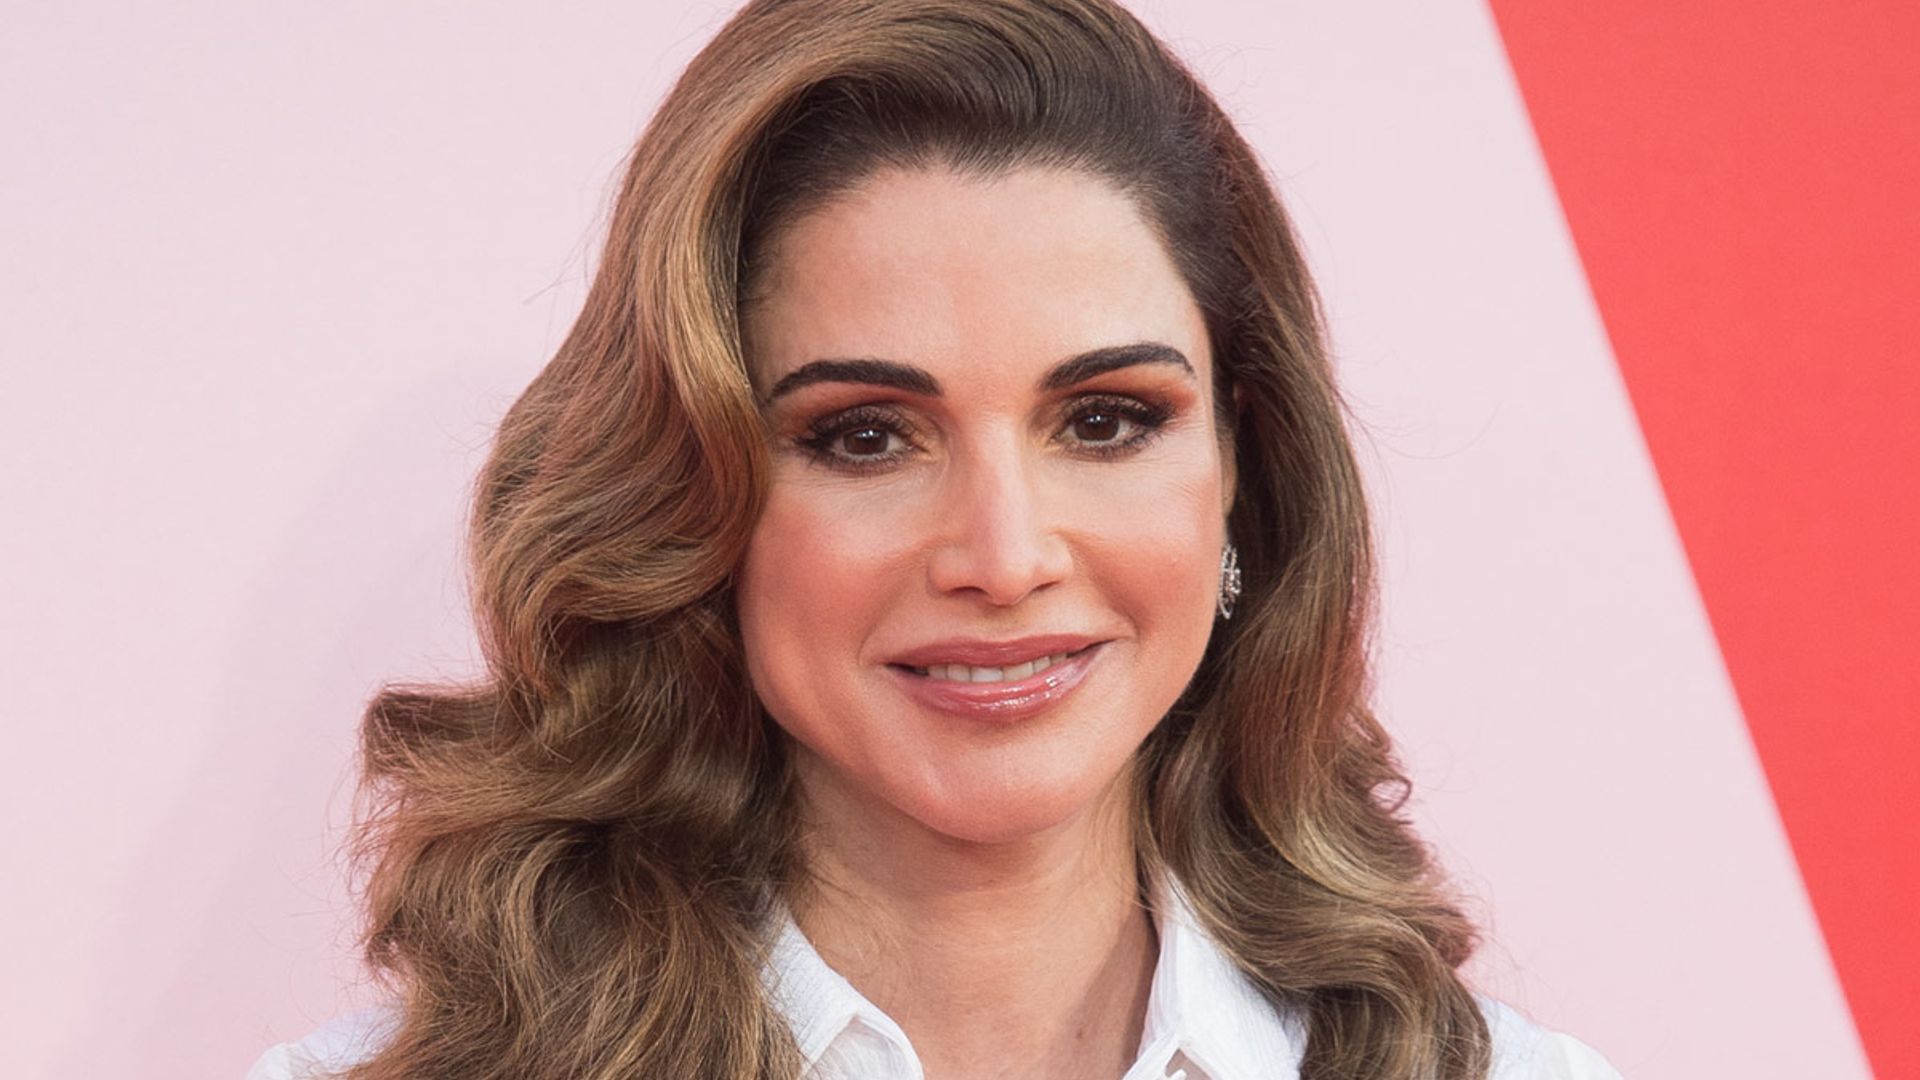 Queen Rania steps out in pink power suit – and looks incredible